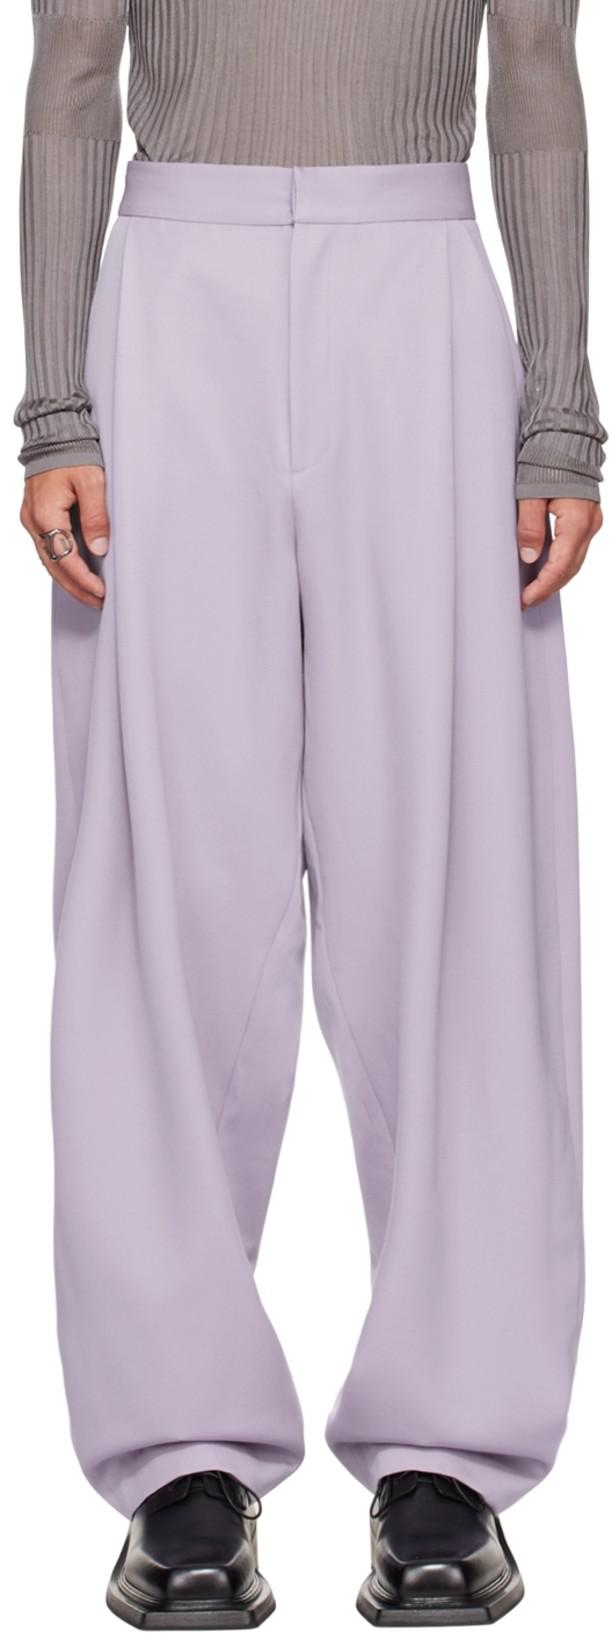 SSENSE Exclusive Purple Cord Trousers by AARON ESH